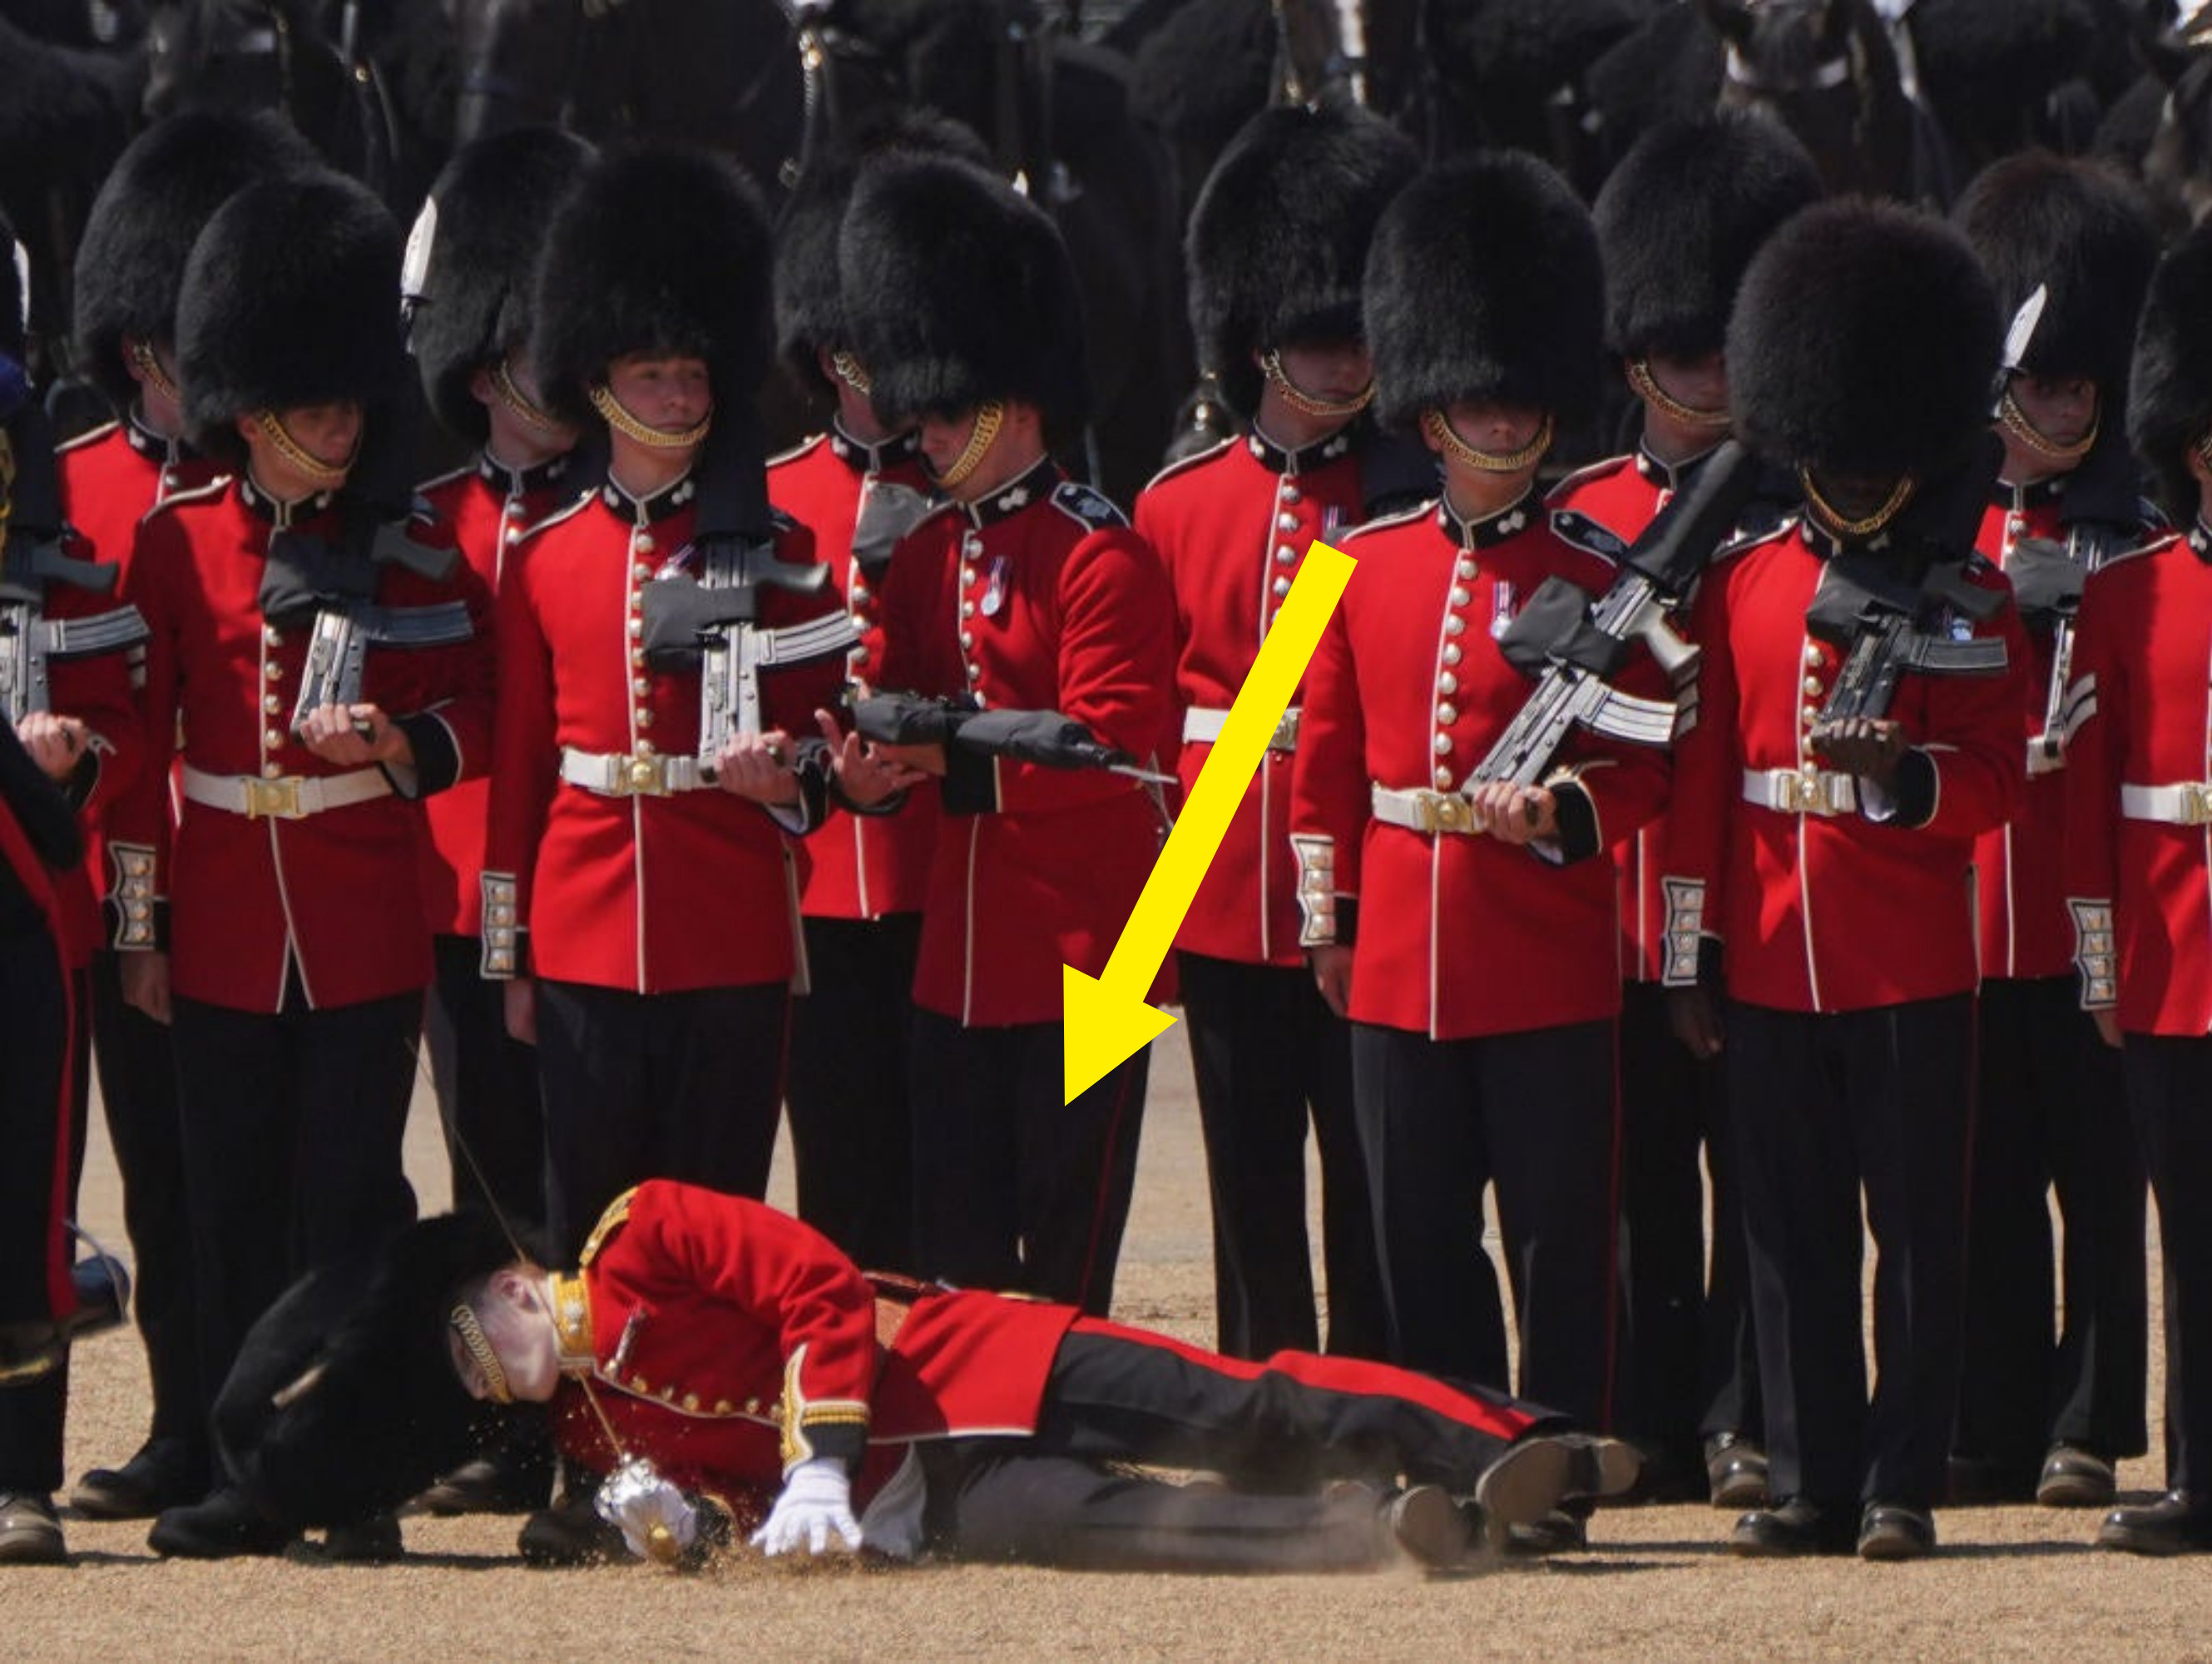 A member of the Coldstream Guards fainting